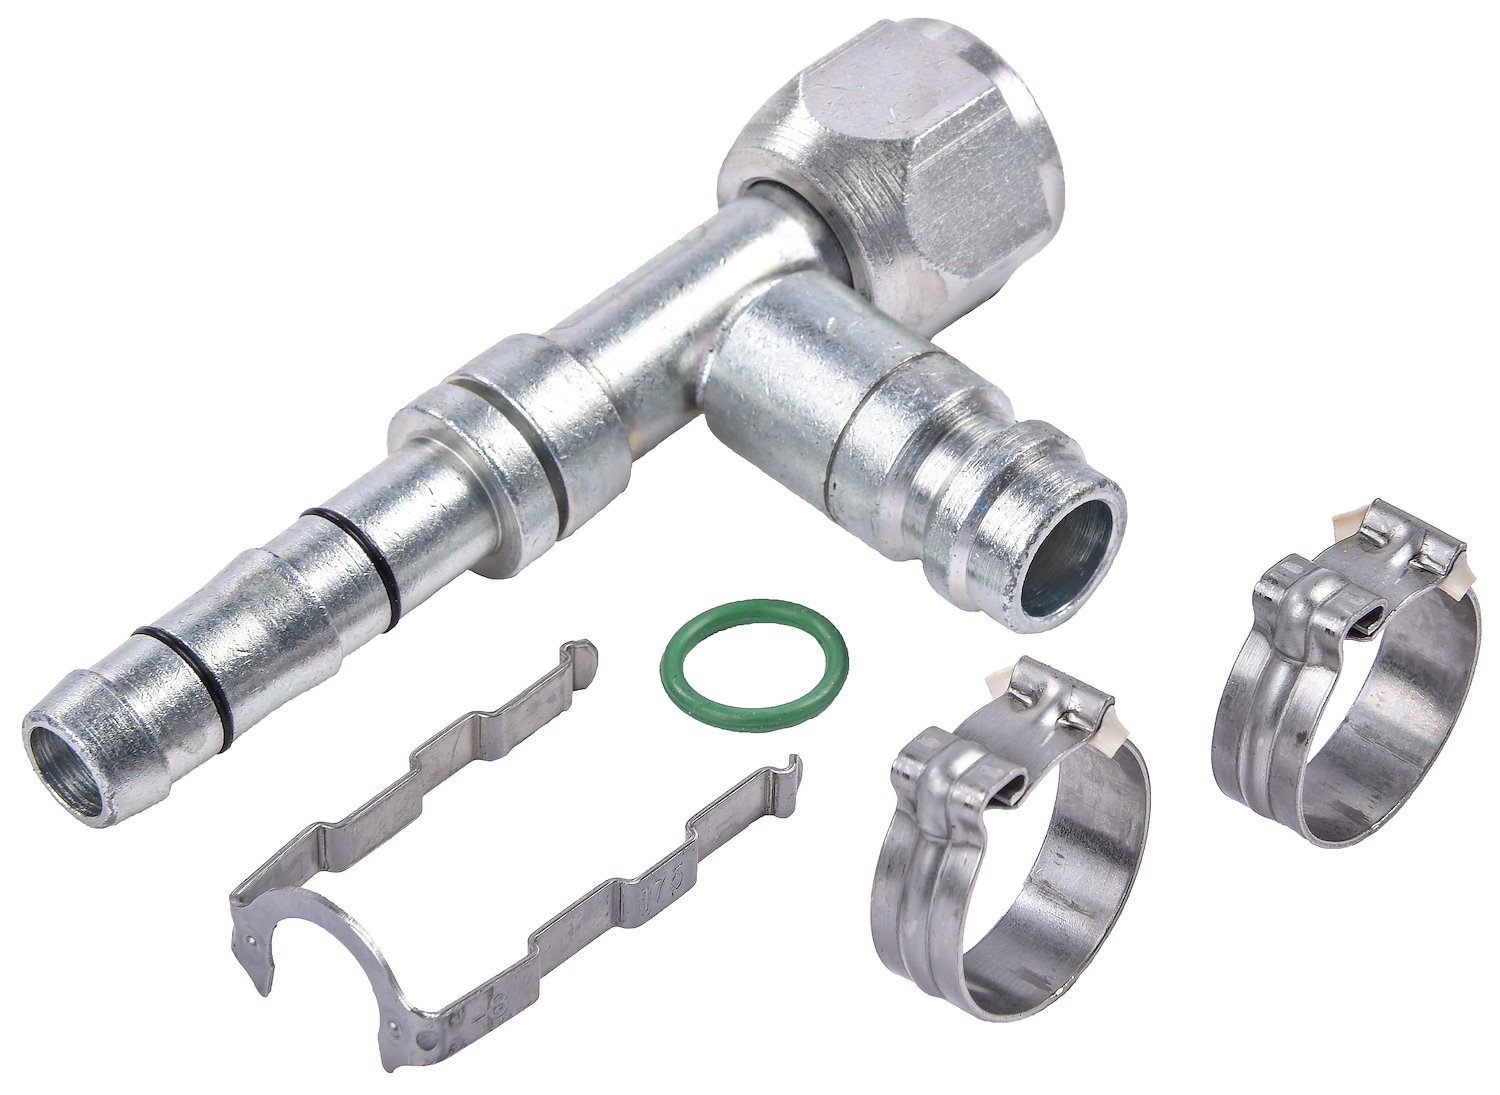 EZ Clip A/C Hose End Fitting Kit with R134a Port [-8 Hose Fitting, Straight]